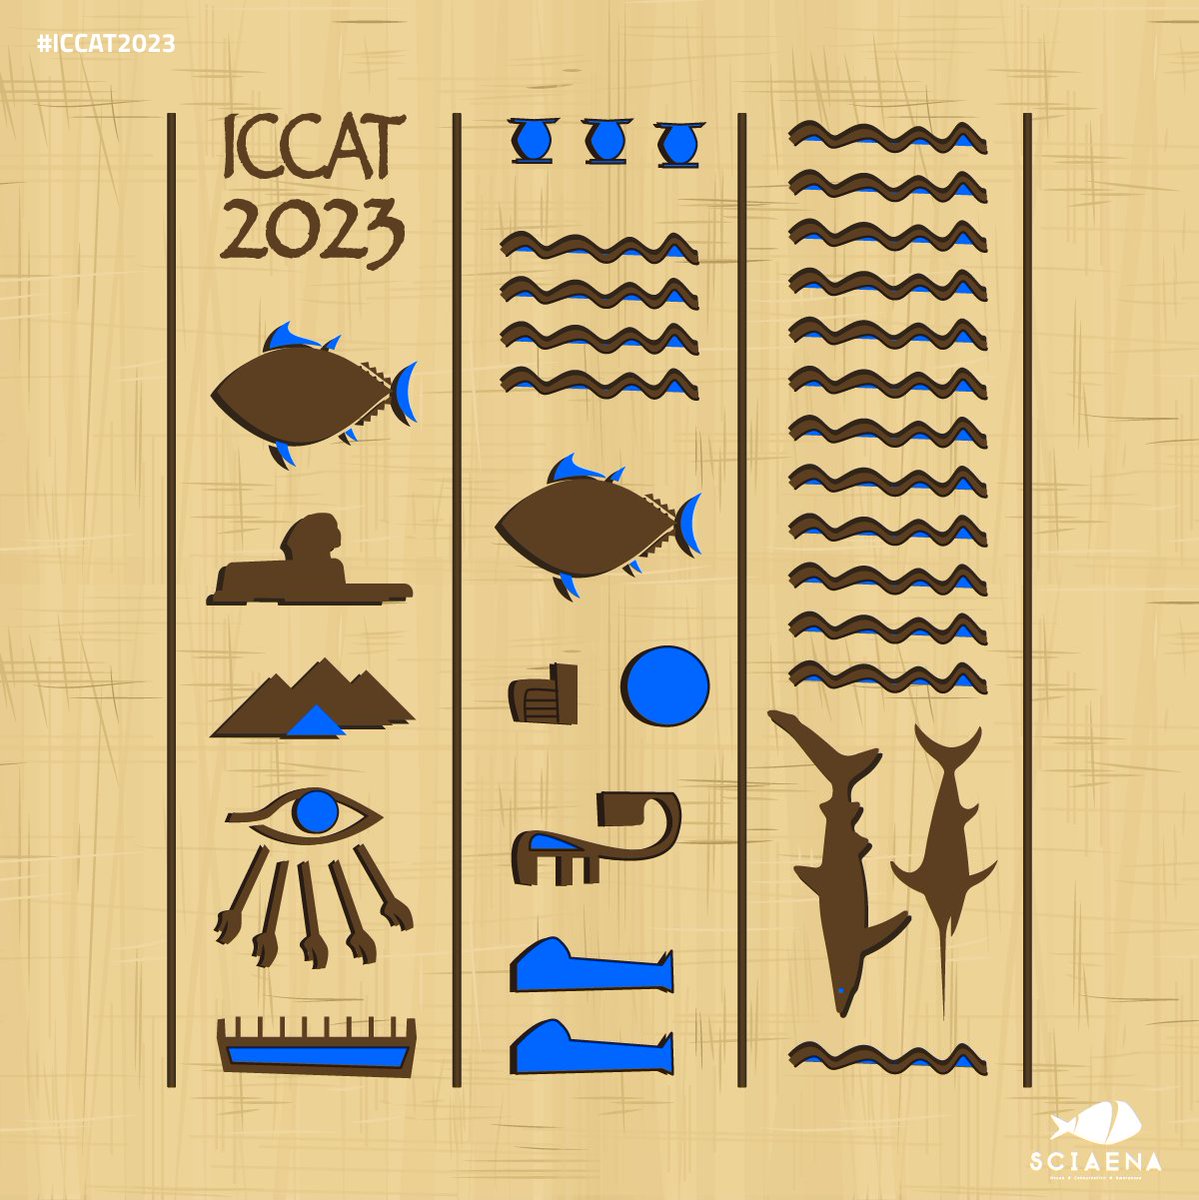 The 28th annual Meeting of #ICCAT is happening from November 13 to 20 in New Cairo, Egypt! And Sciaena’s team will once again be following the discussions very closely. #StayTuned for our 2023 priorities...👀🐟🦈 #ICCAT2023 iccat.int/en/Meetings.ht…